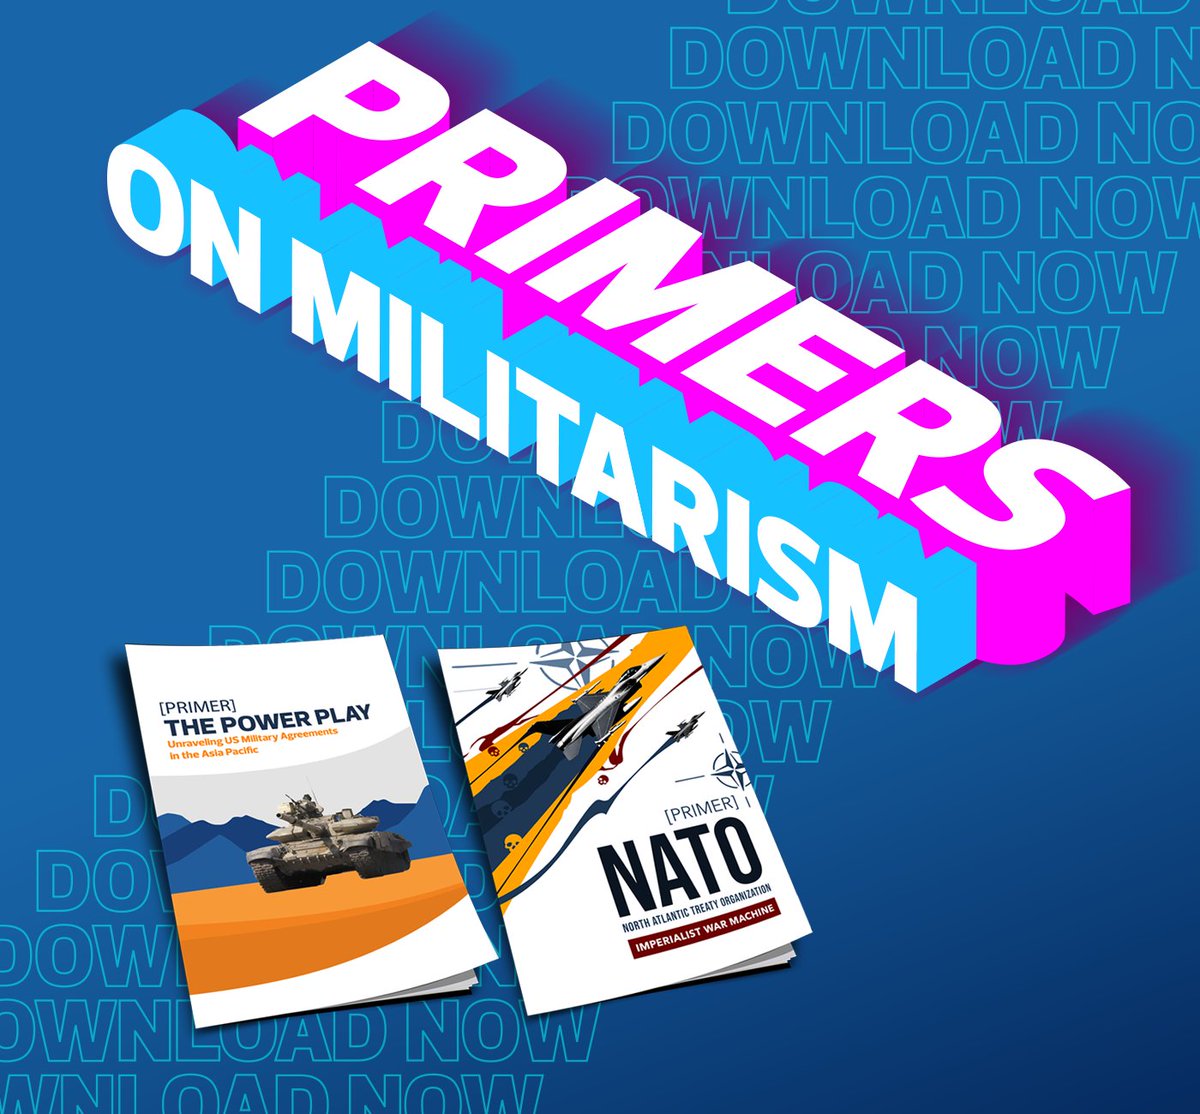 PRIMERS ON MILITARISM IS OUT! You can download our latest publication through our Knowledge Hub. 1. The Power Play: Unraveling US Military Agreements in the Asia Pacific tinyurl.com/5y8z3df9 2. NATO: Imperialist War Machine tinyurl.com/3j4rrub4